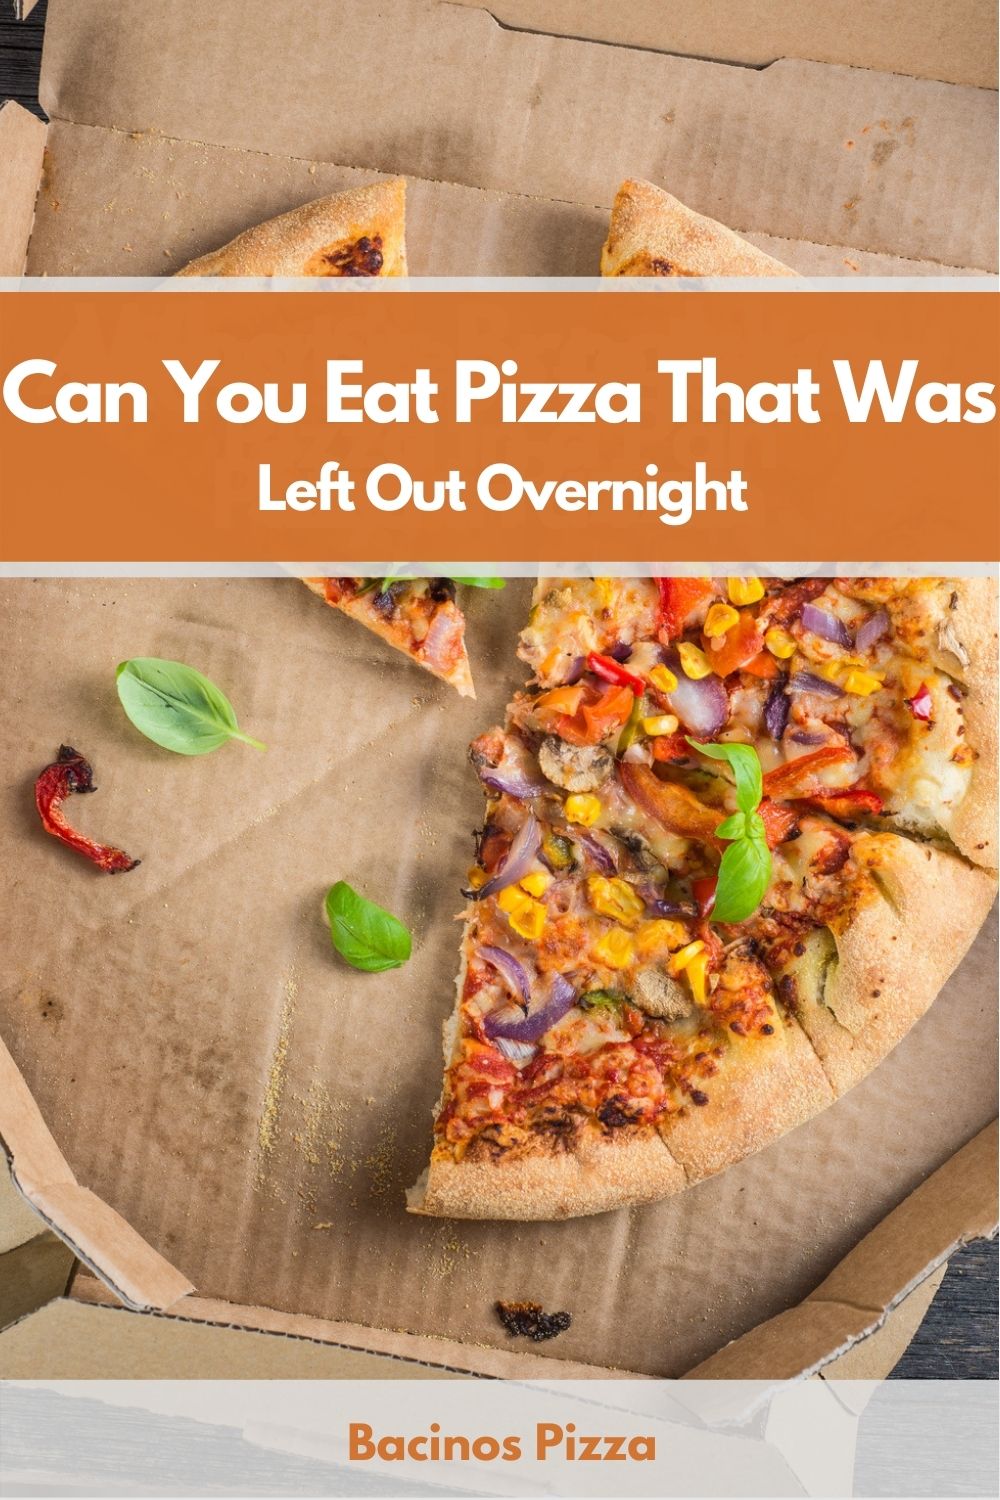 Can You Eat Pizza That Was Left Out Overnight pin